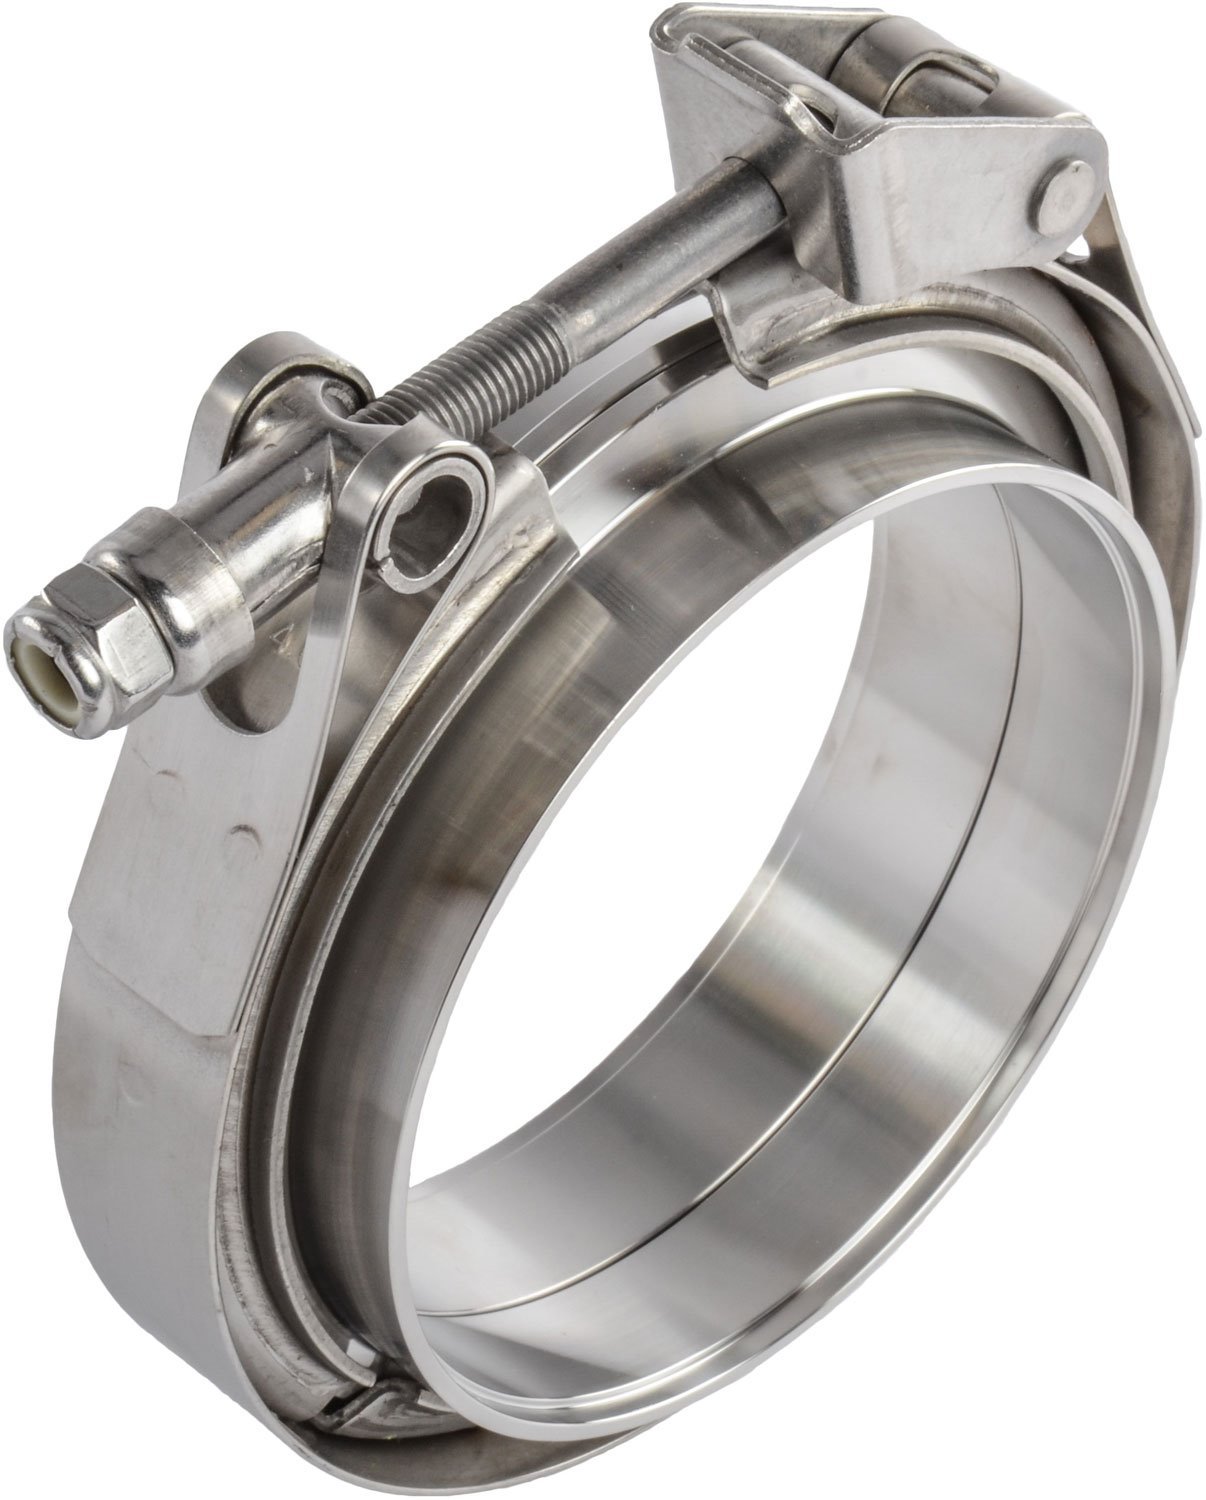 Stainless Steel Quick Release V-Band Clamp & Flanges